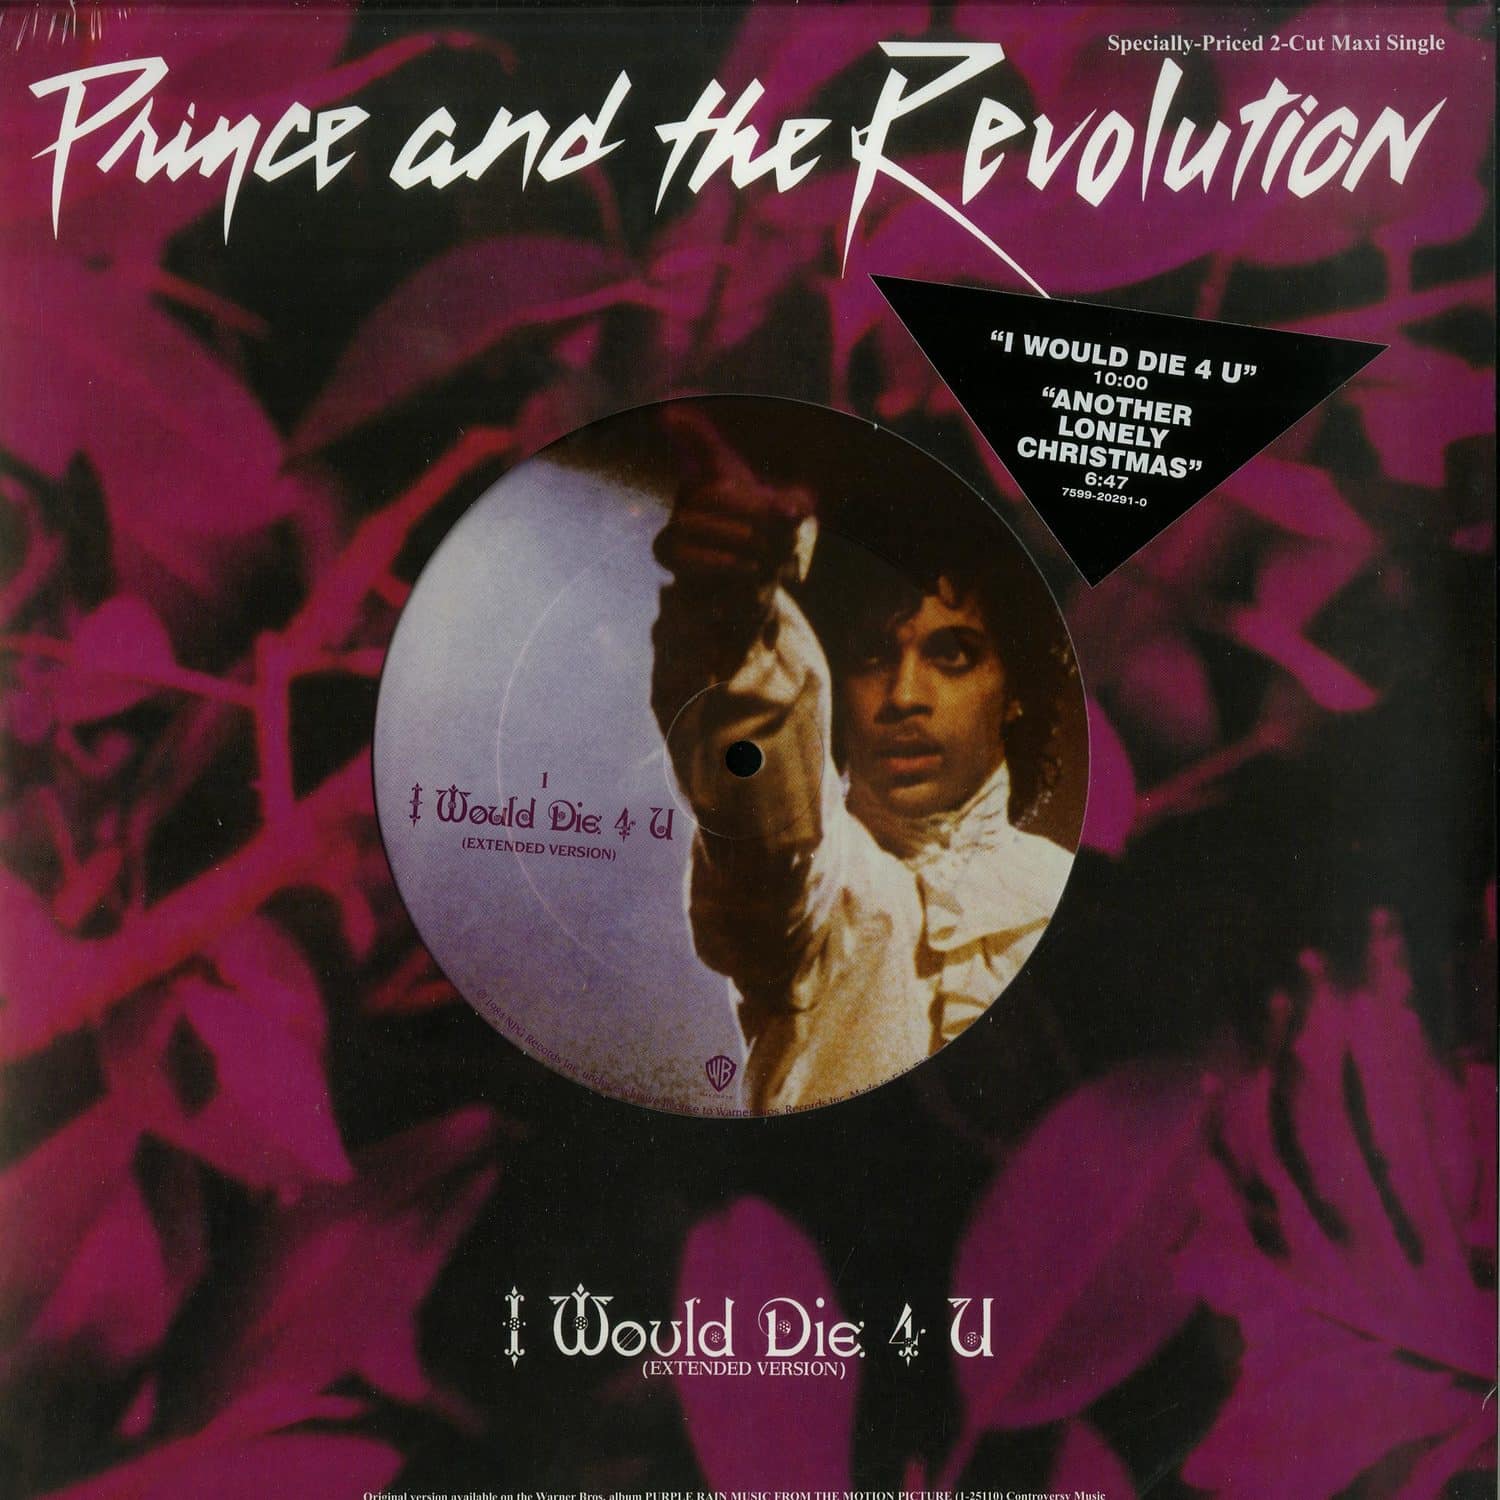 Prince and the Revolution - I WOULD DIE 4 U